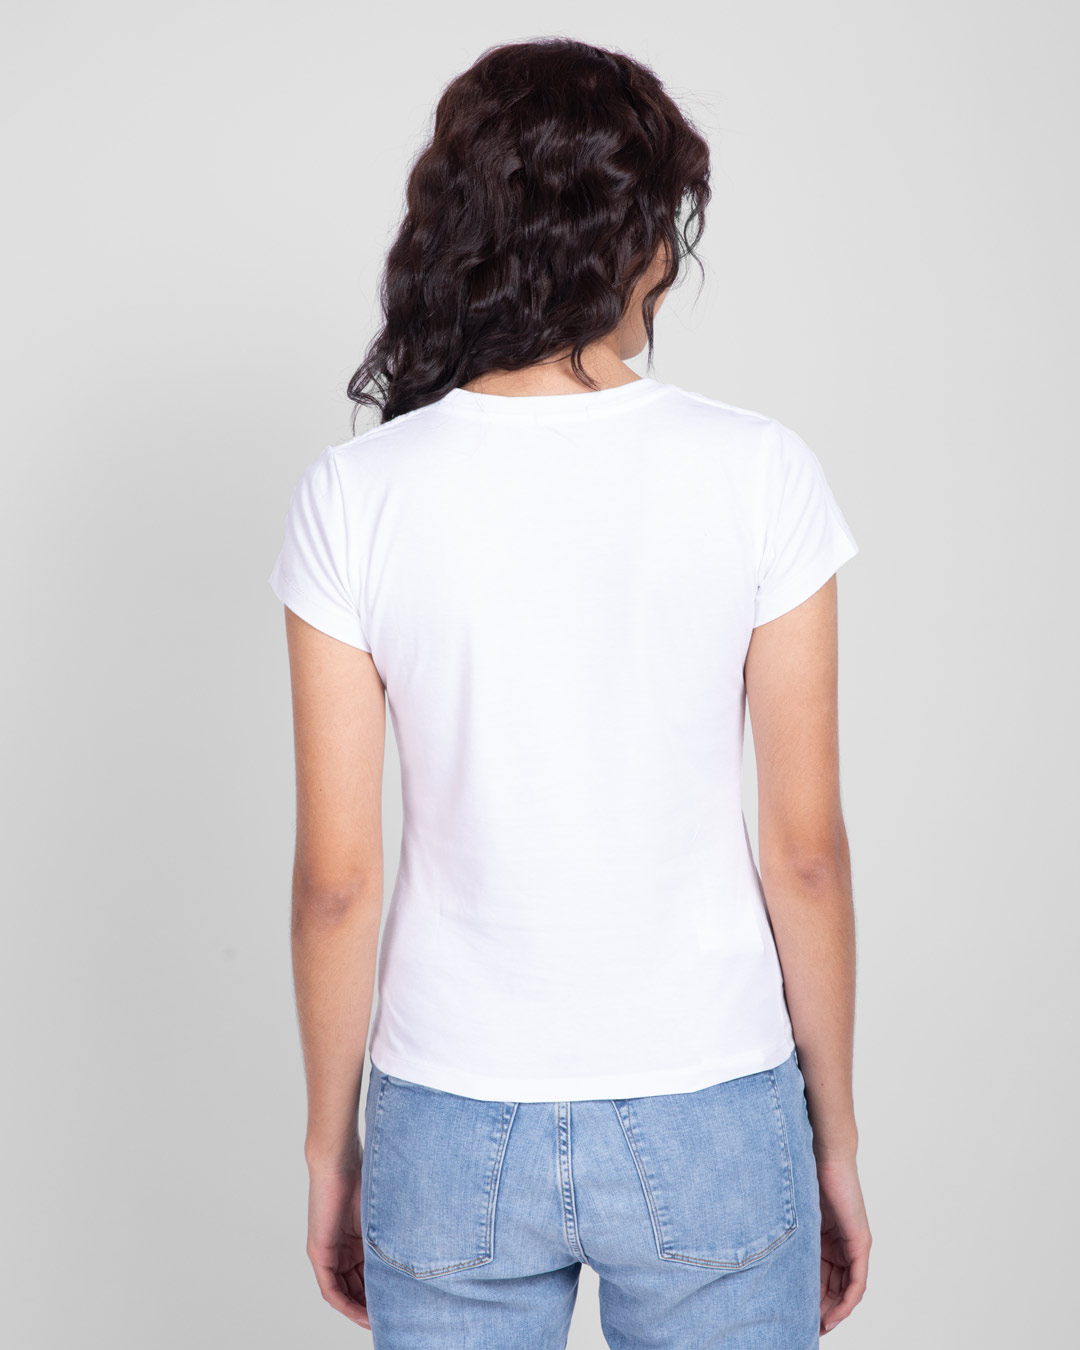 Shop All We Have Half Sleeve T-Shirt White-Back